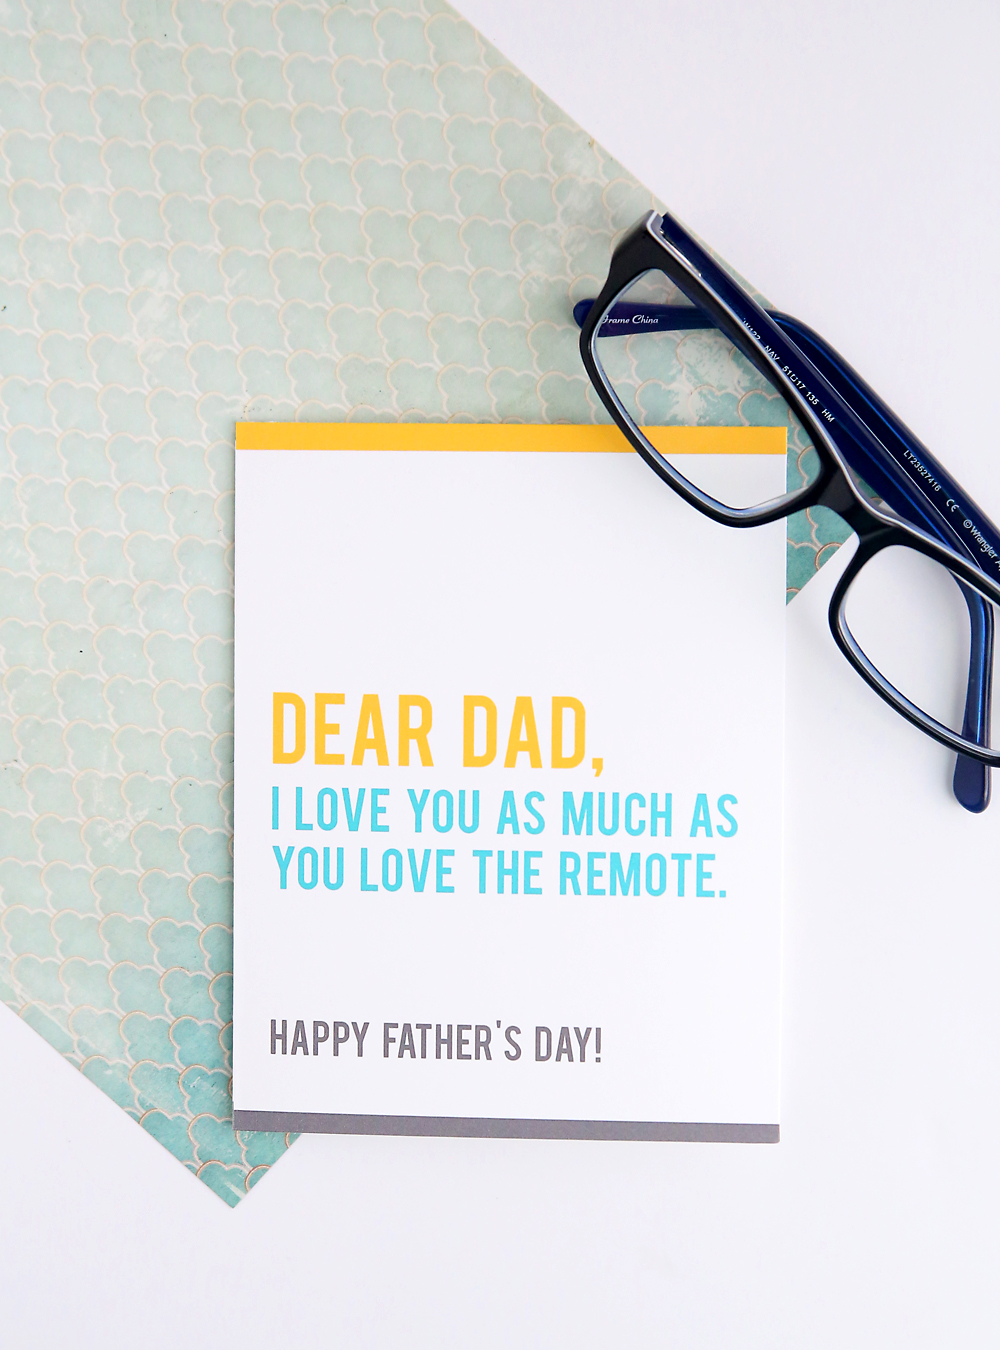 Printable Father\'s Day card that says Dear Dad, I love you as much as you love the remote.